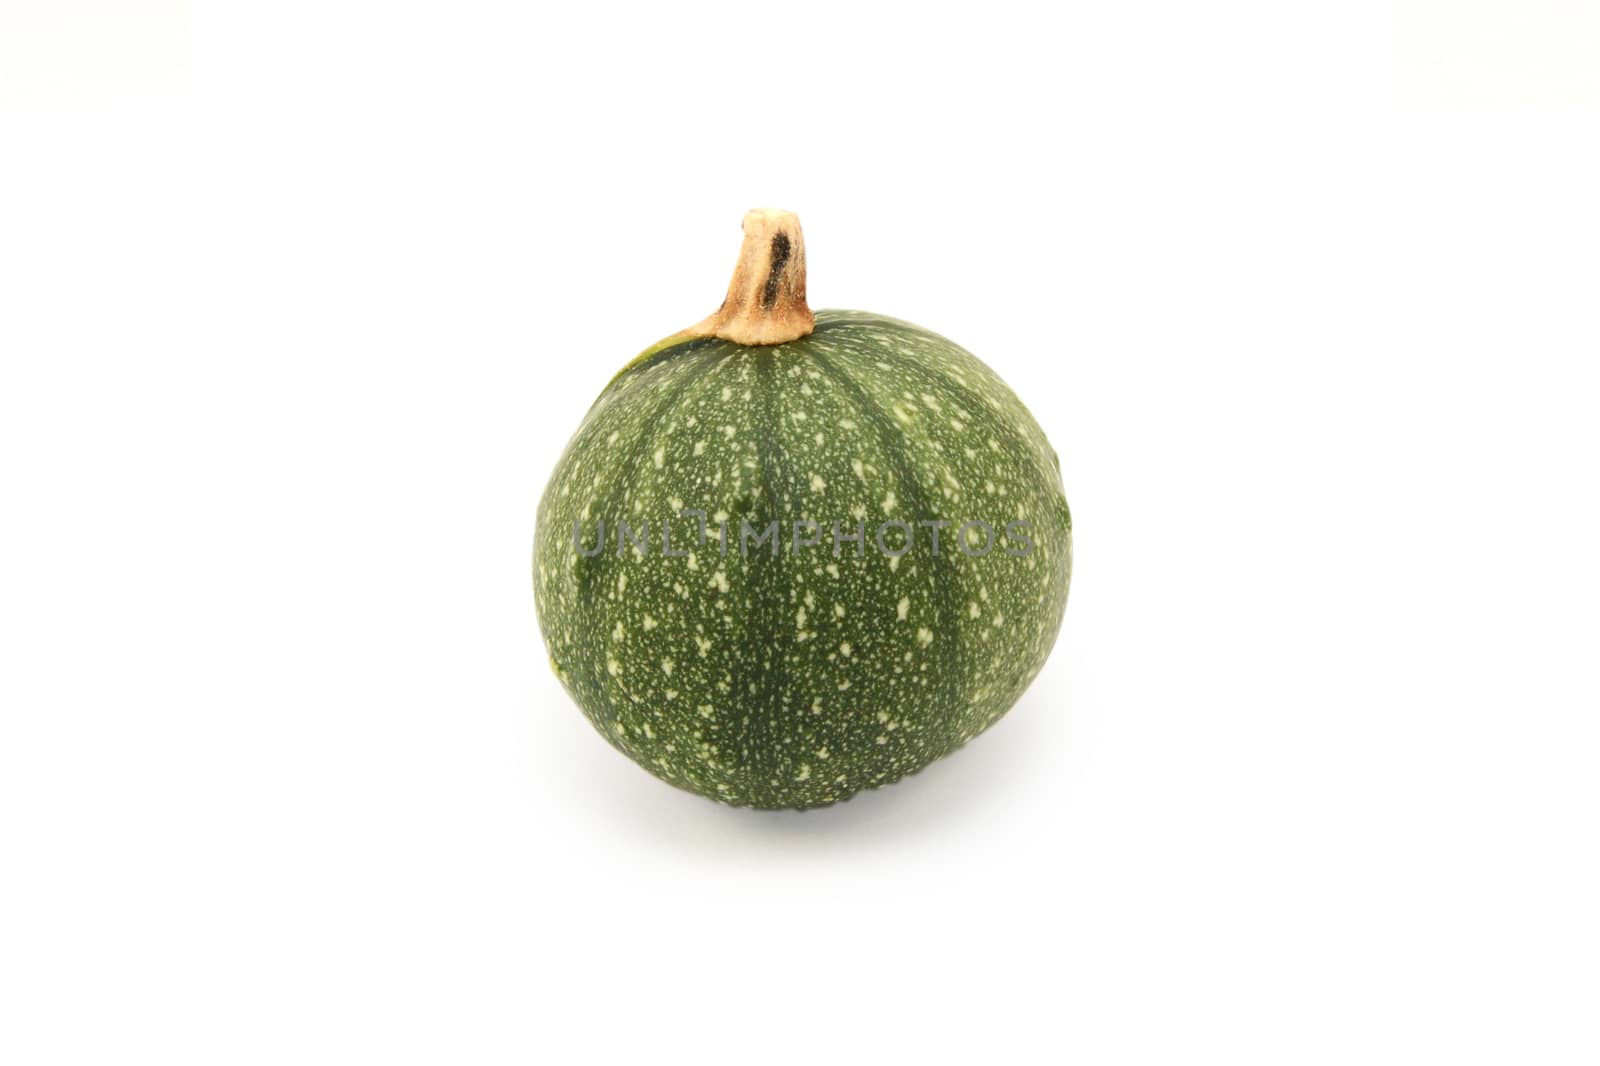 Small round ornamental gourd with green skin for decoration, on a white background